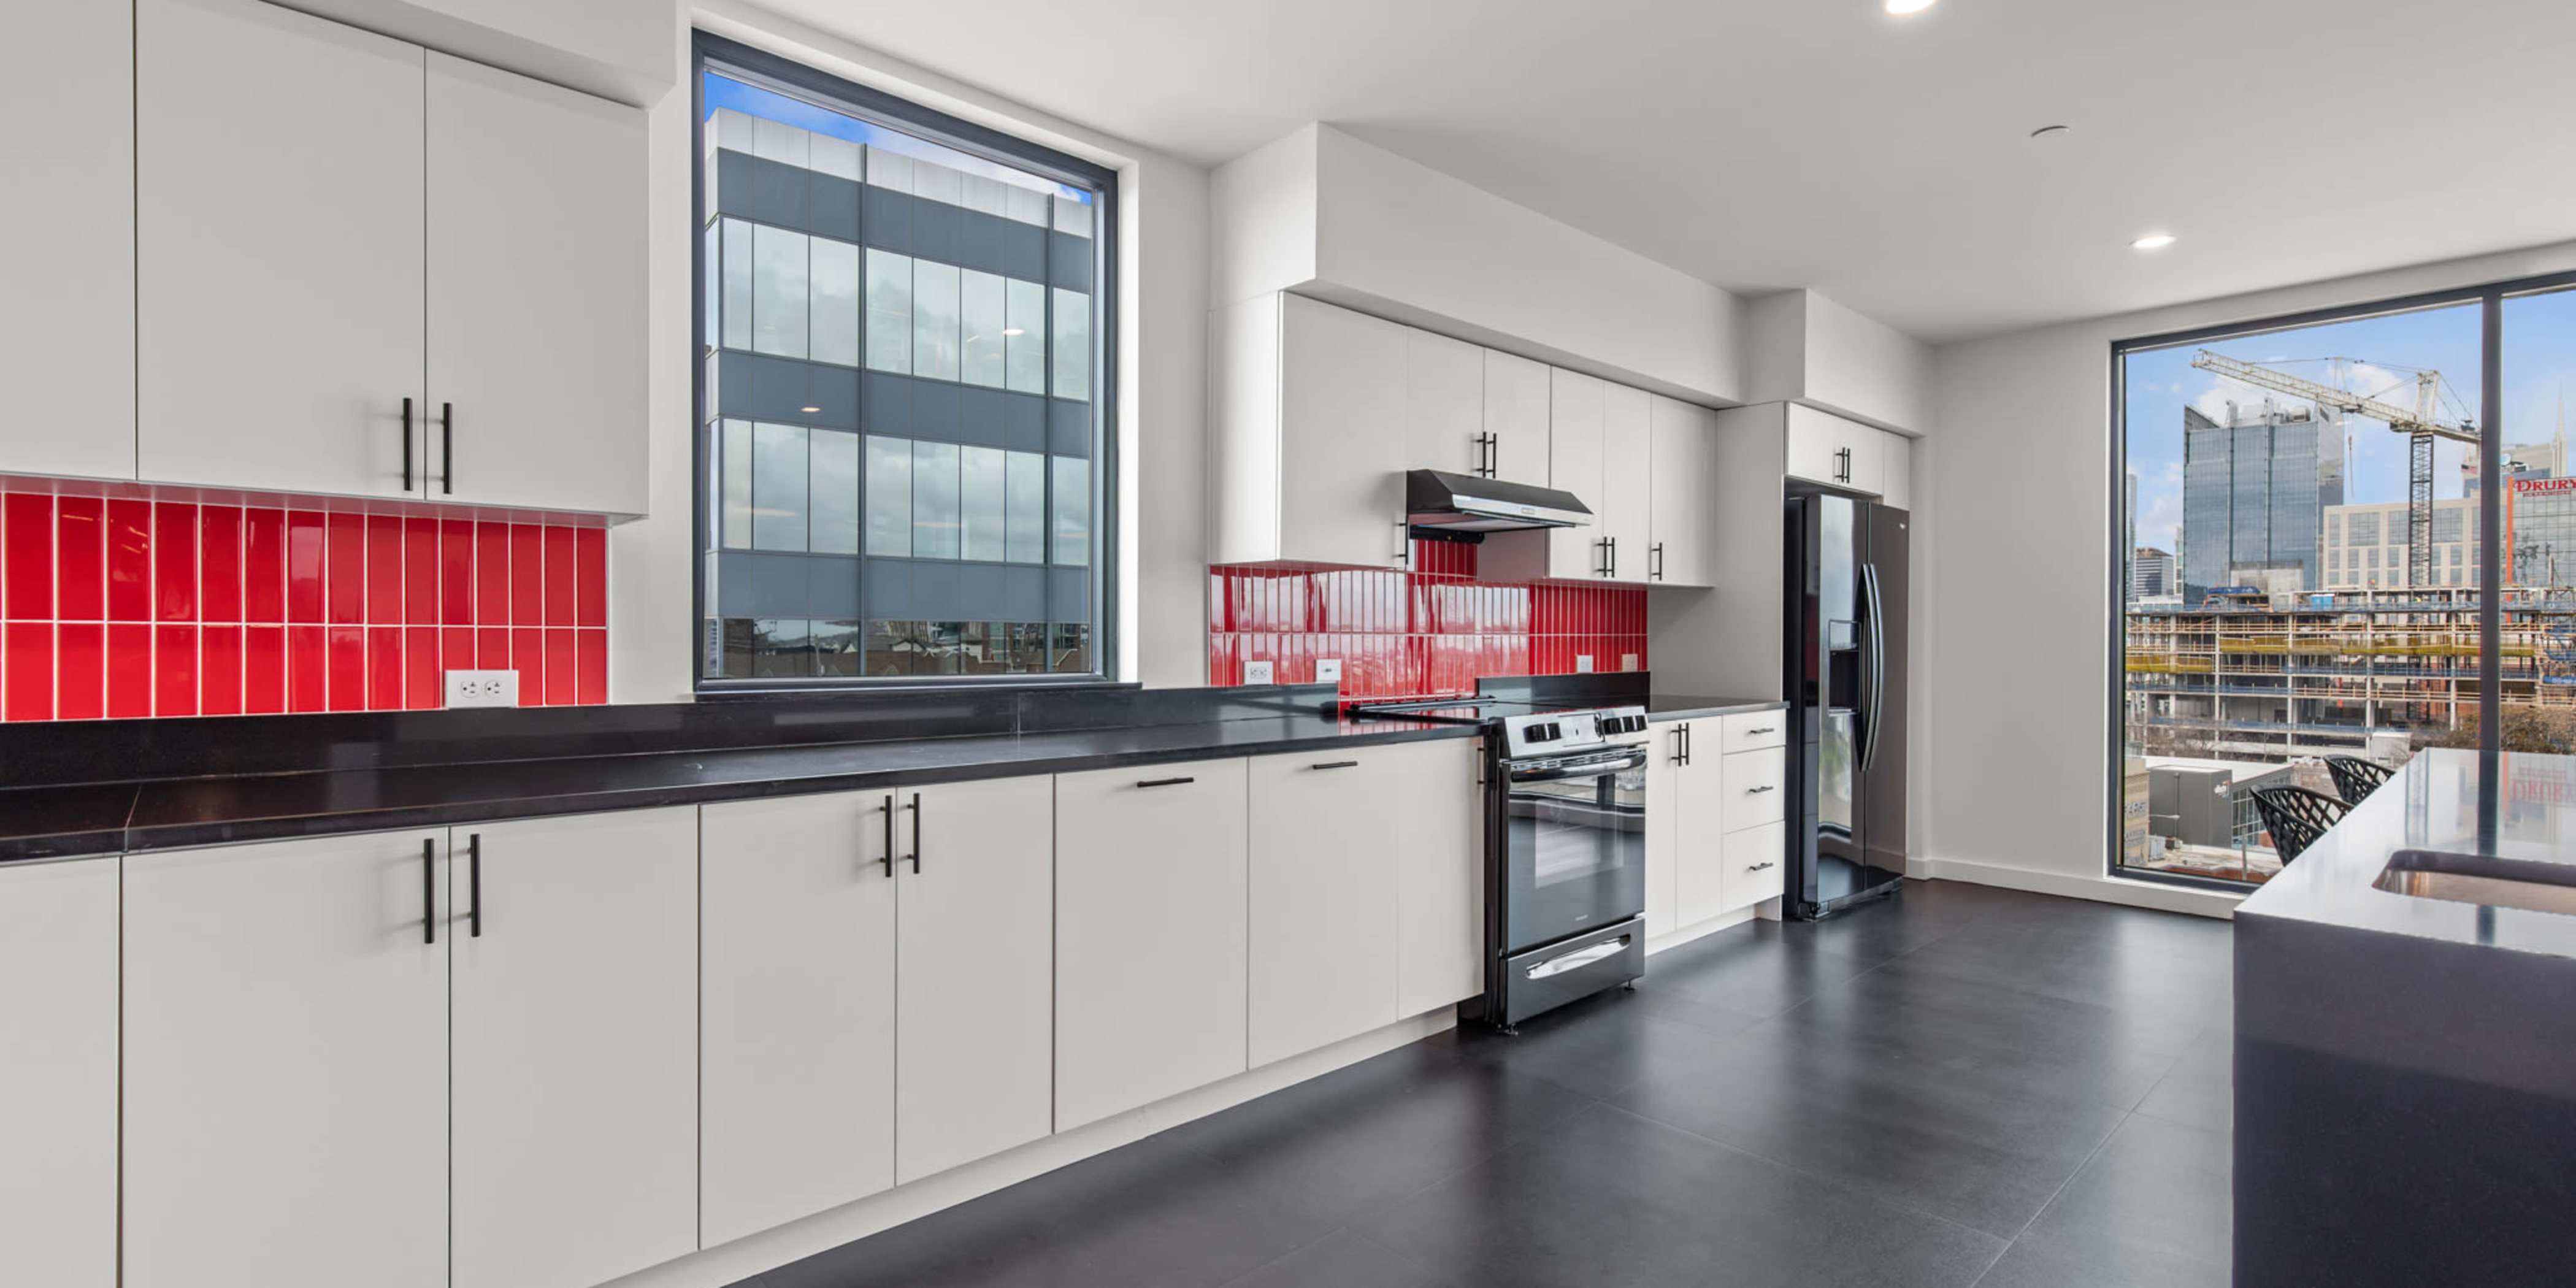 Apartments by Rutledge Hill, TN - Rutledge Flats - Community Kitchen with White Cabinets, Black Countertops, Red Tile Backsplash, Stainless Steel Appliances, and Large Windows